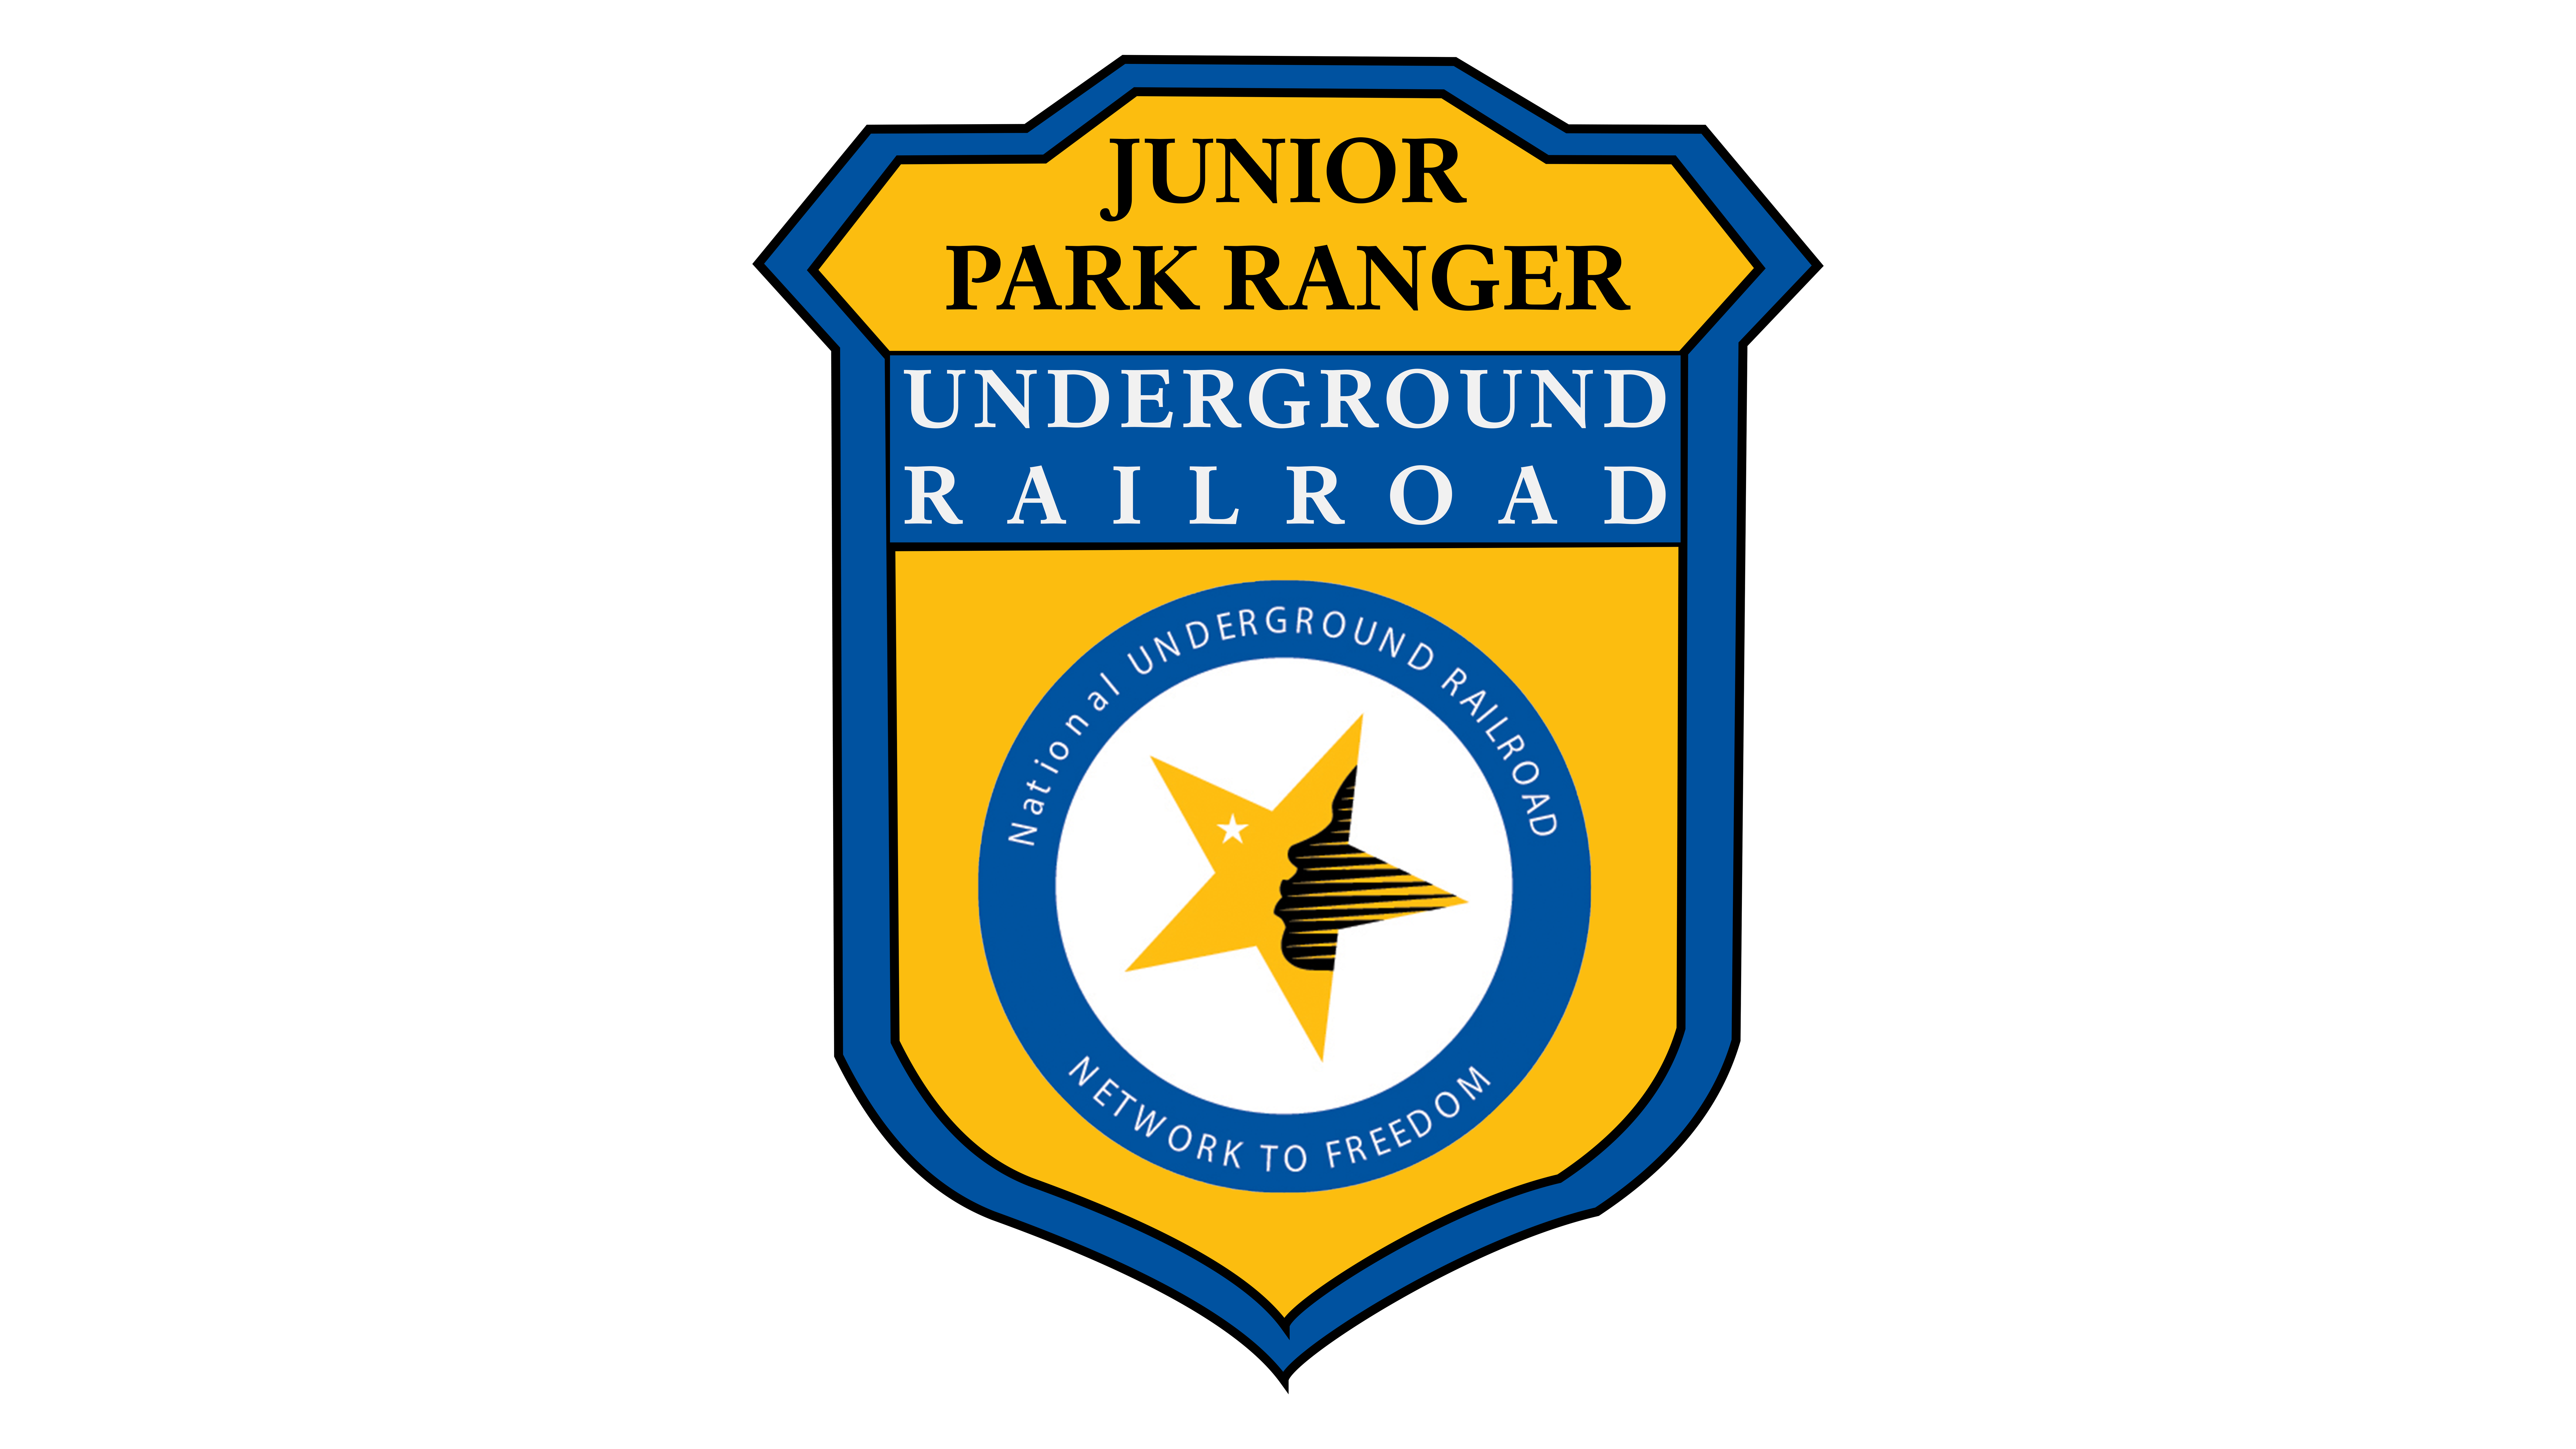 Park Ranger Badge with text reading "JUNIOR PARK RANGER UNDERGROUND RAILROAD." Below the text is the Network to Freedom Logo enveloped in a Blue Circle.